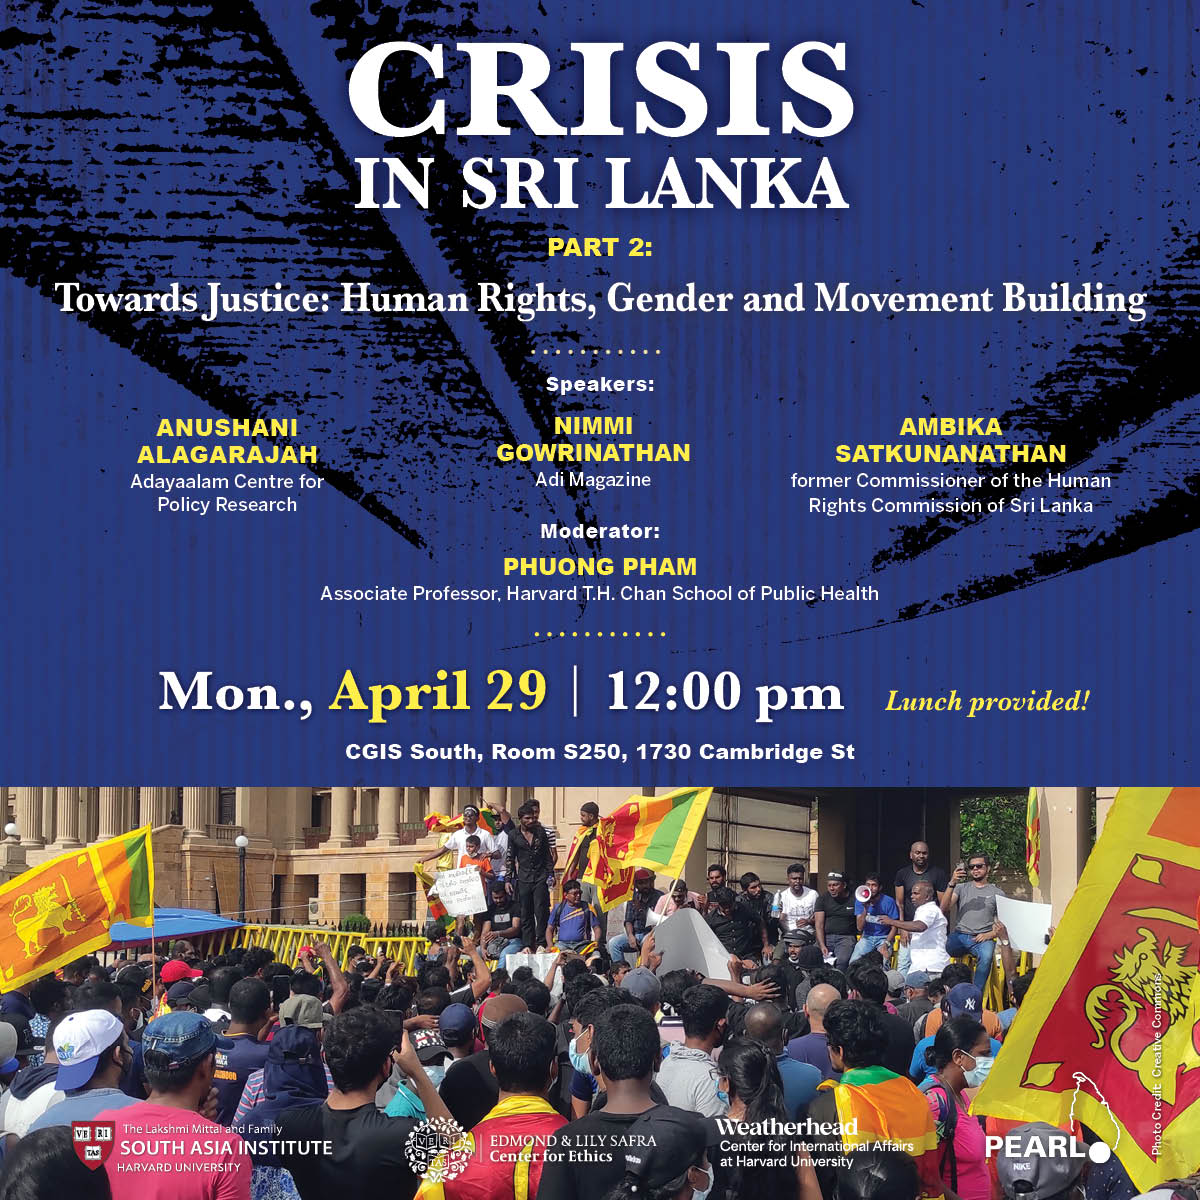 Join us for the second session of our series “Crisis in Sri Lanka,” with speakers Anushani Alagarajah (@Nachchellai), Nimmi Gowrinathan (@nimmideviarchy), and Ambika Satkunanathan (@ambikasat), and moderator Phuong Pham from @HarvardChanSPH. Please RSVP: bit.ly/crisis-in-sri-…